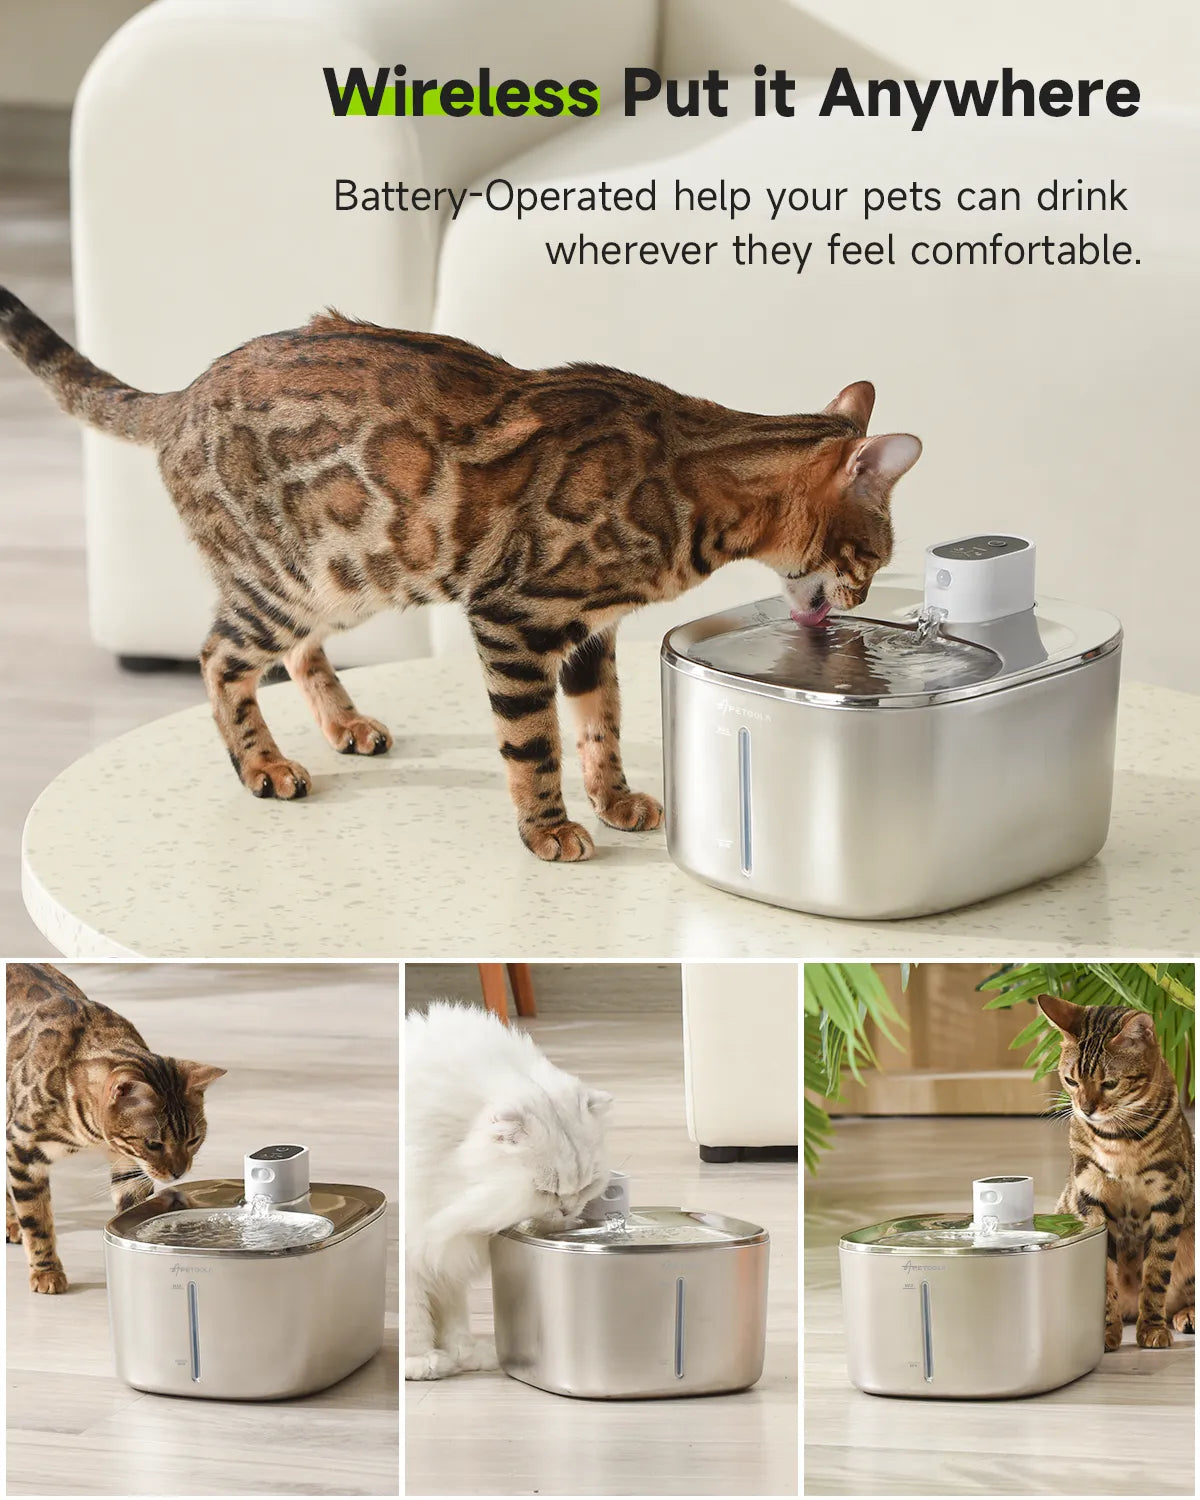 Wireless Cat Water Fountain with Motion Sensor: Convenient, Stainless Steel, Rechargeable, Quiet Operation - Hydration for Pets.  petlums.com   